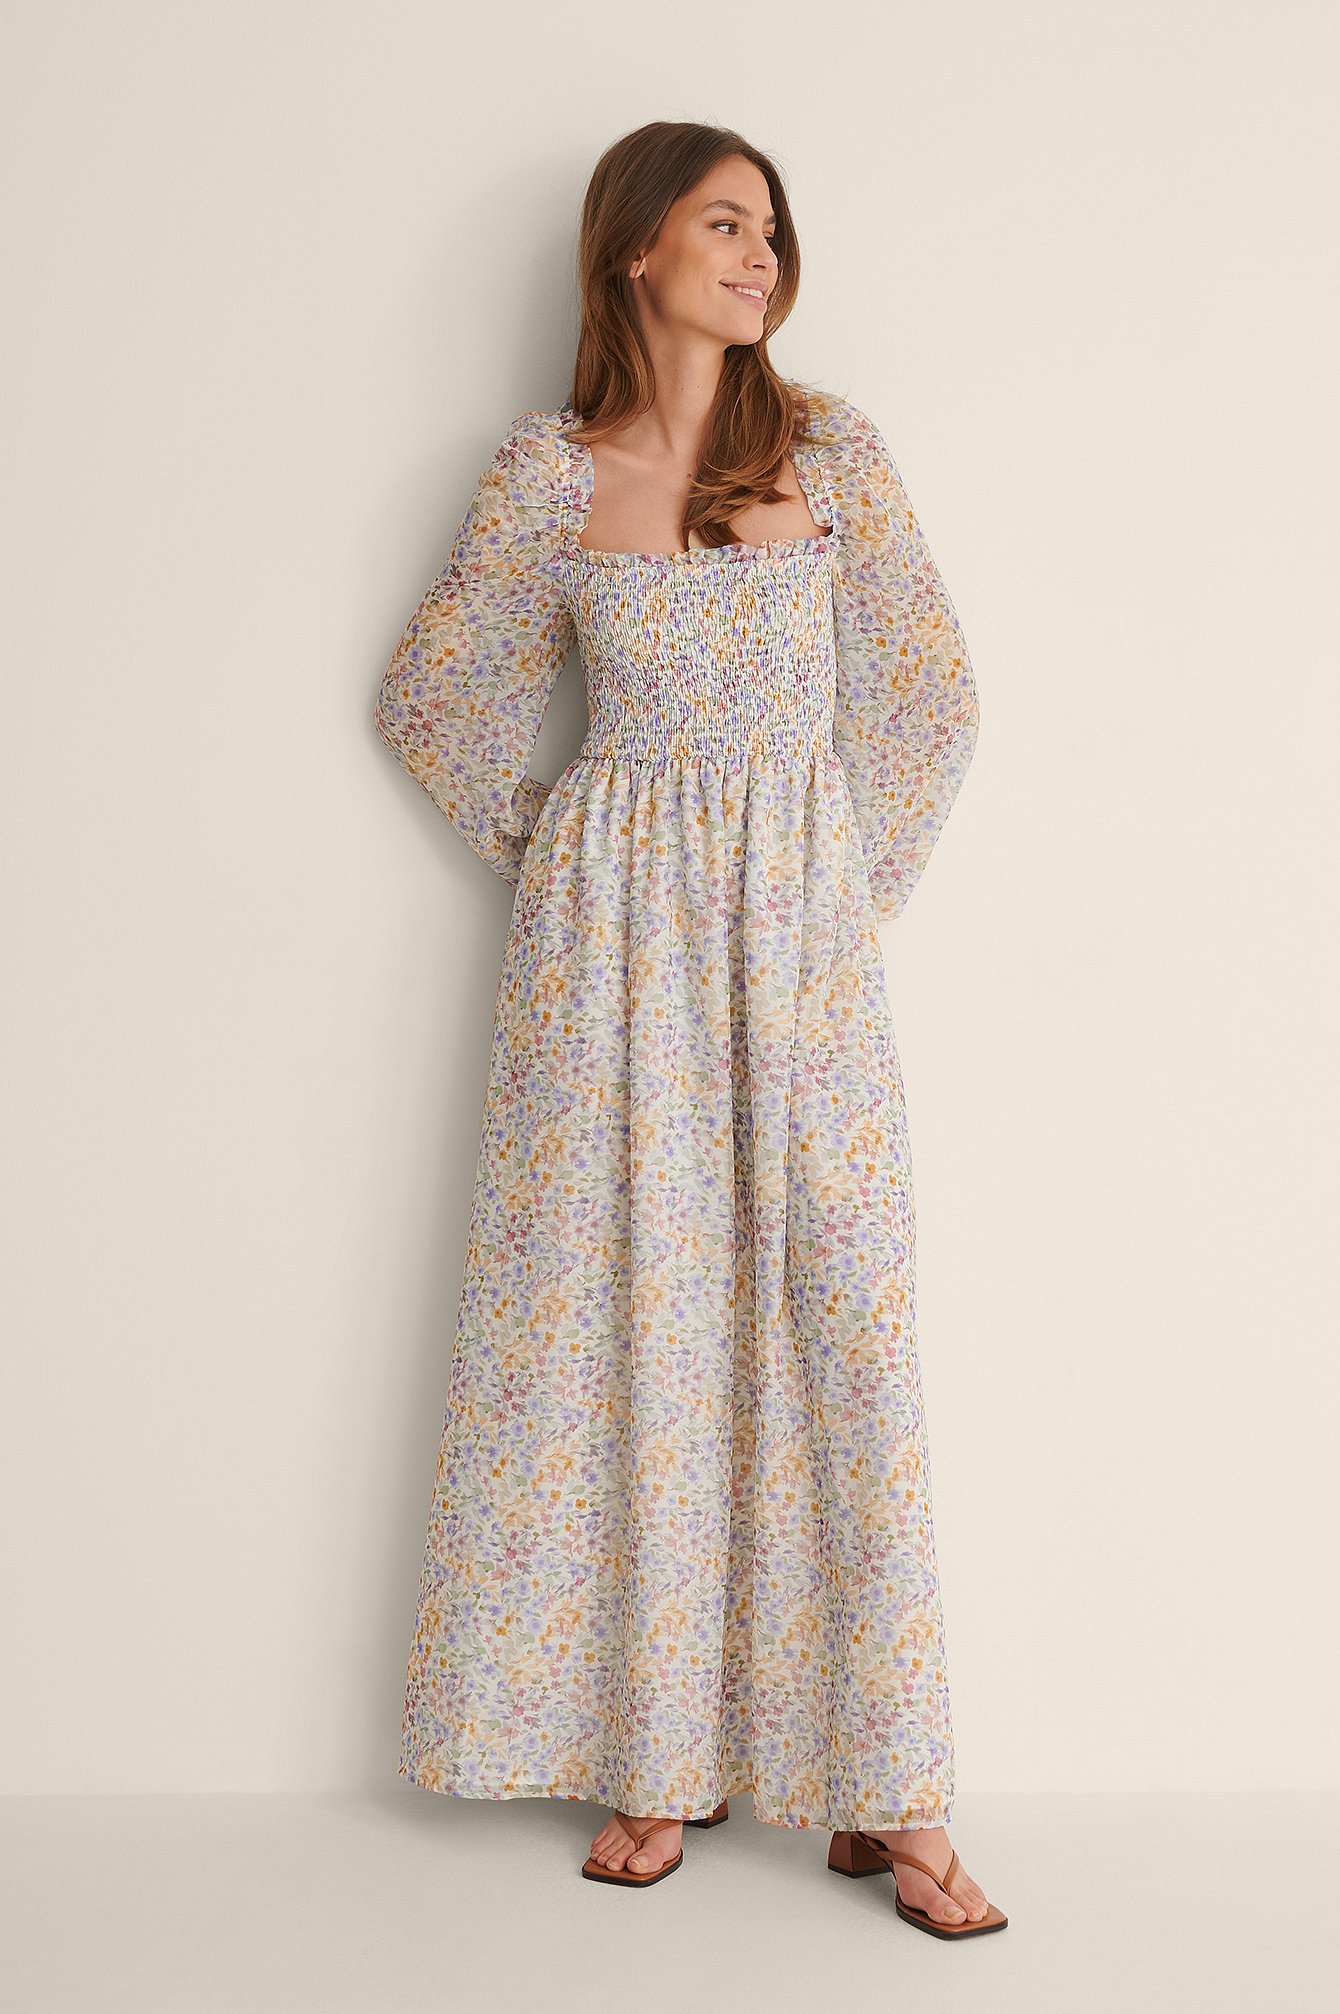 Smocked Balloon Sleeve Maxi Dress Outfit.